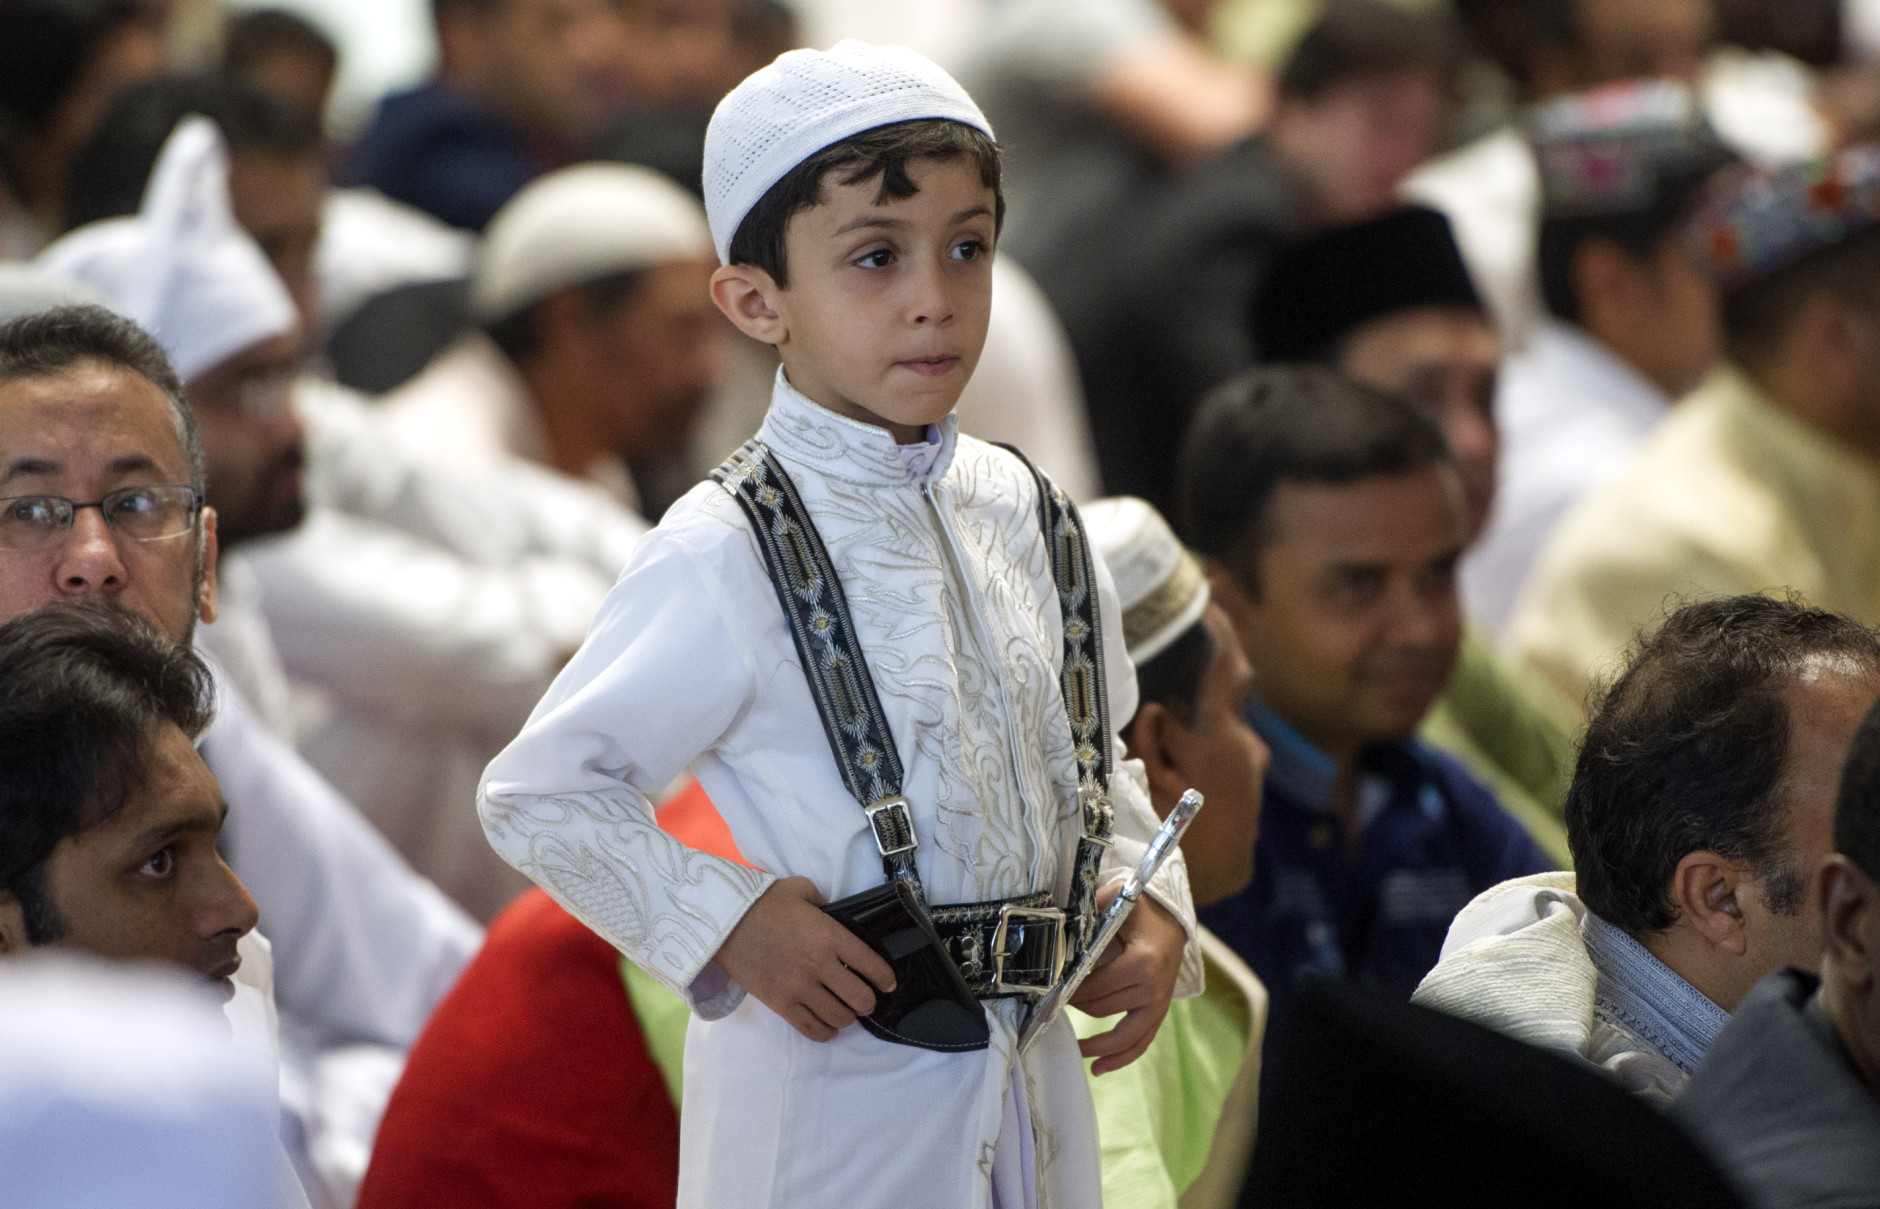 A boy stands up after Eid al-Fitr prayers marking the end of the holy fasting month of Ramadan in Mexico City, Wednesday, July 6, 2016. According to the Washington-based Pew Forum on Religion and Public Life, today there are approximately 110,000 Muslims living in Mexico. (AP Photo/Nick Wagner)